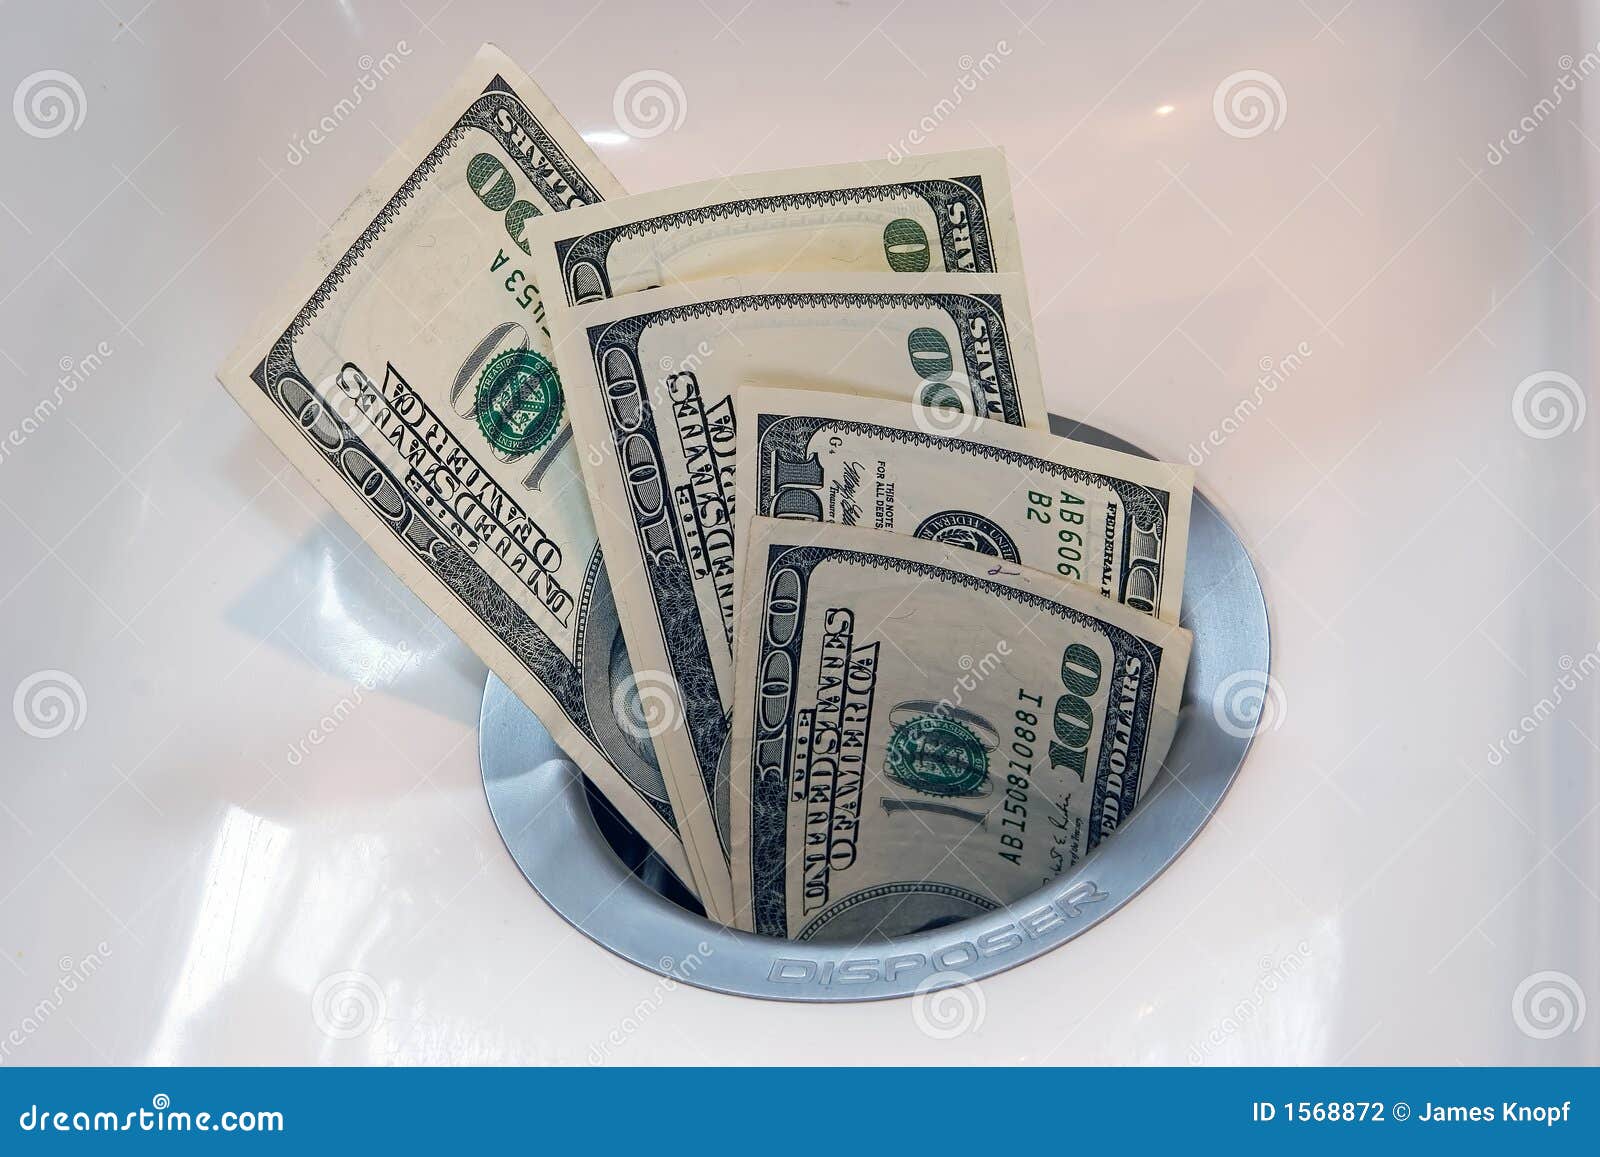 clipart of money going down the drain - photo #27